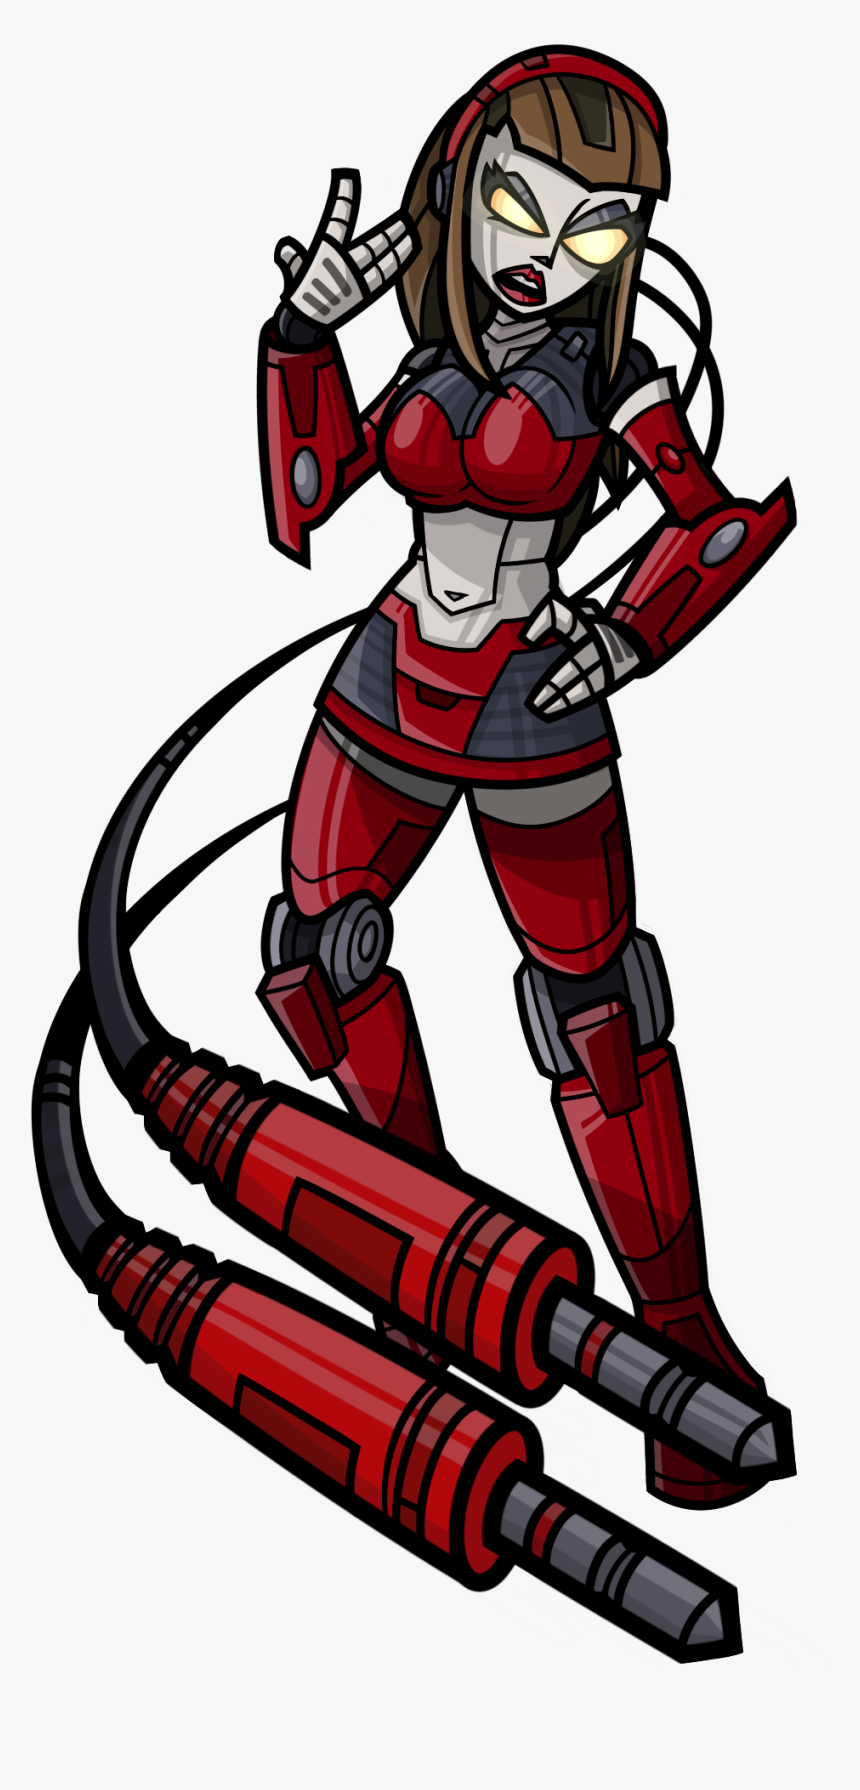 Here"s Some Art Of Courtney Gears From Ratchet & Clank - Ratchet And Clank 3 Courtney Gears, HD Png Download, Free Download